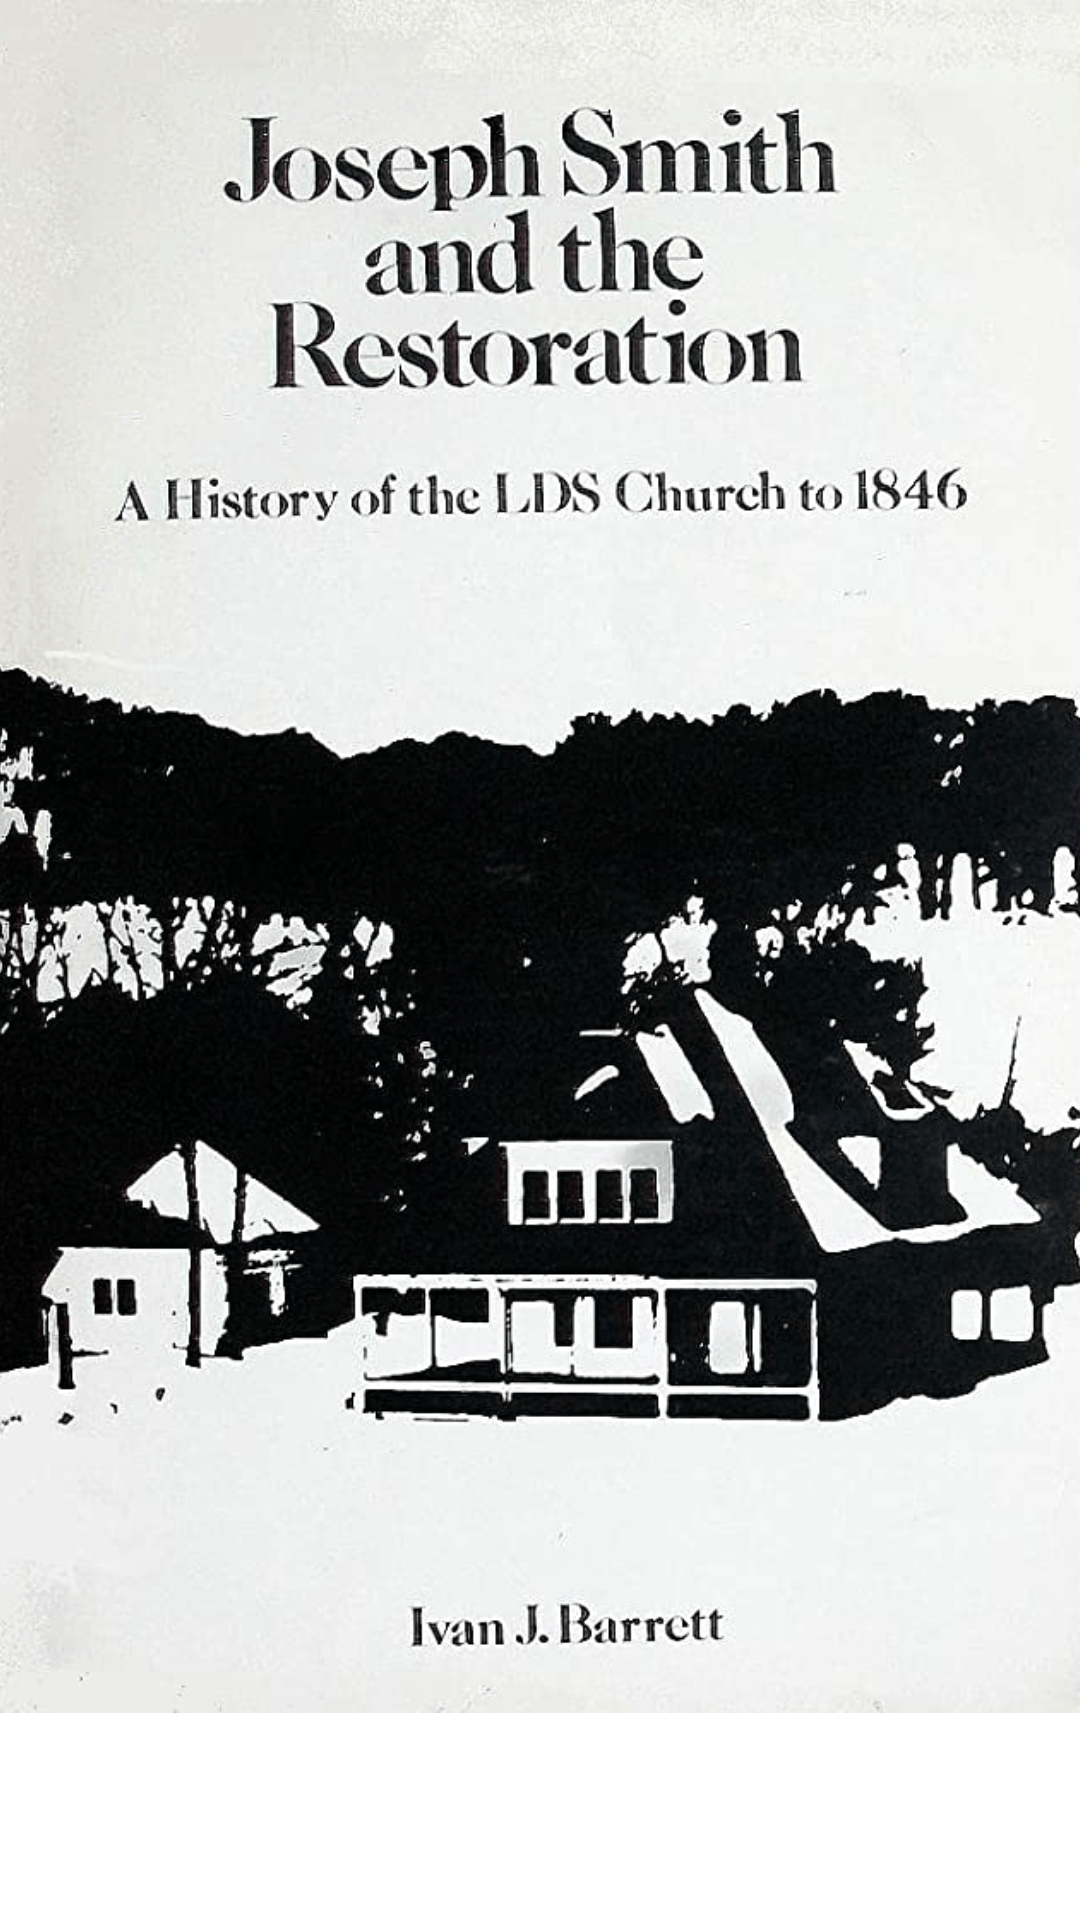 Joseph Smith and the Restoration: A History of the LDS Church to 1846